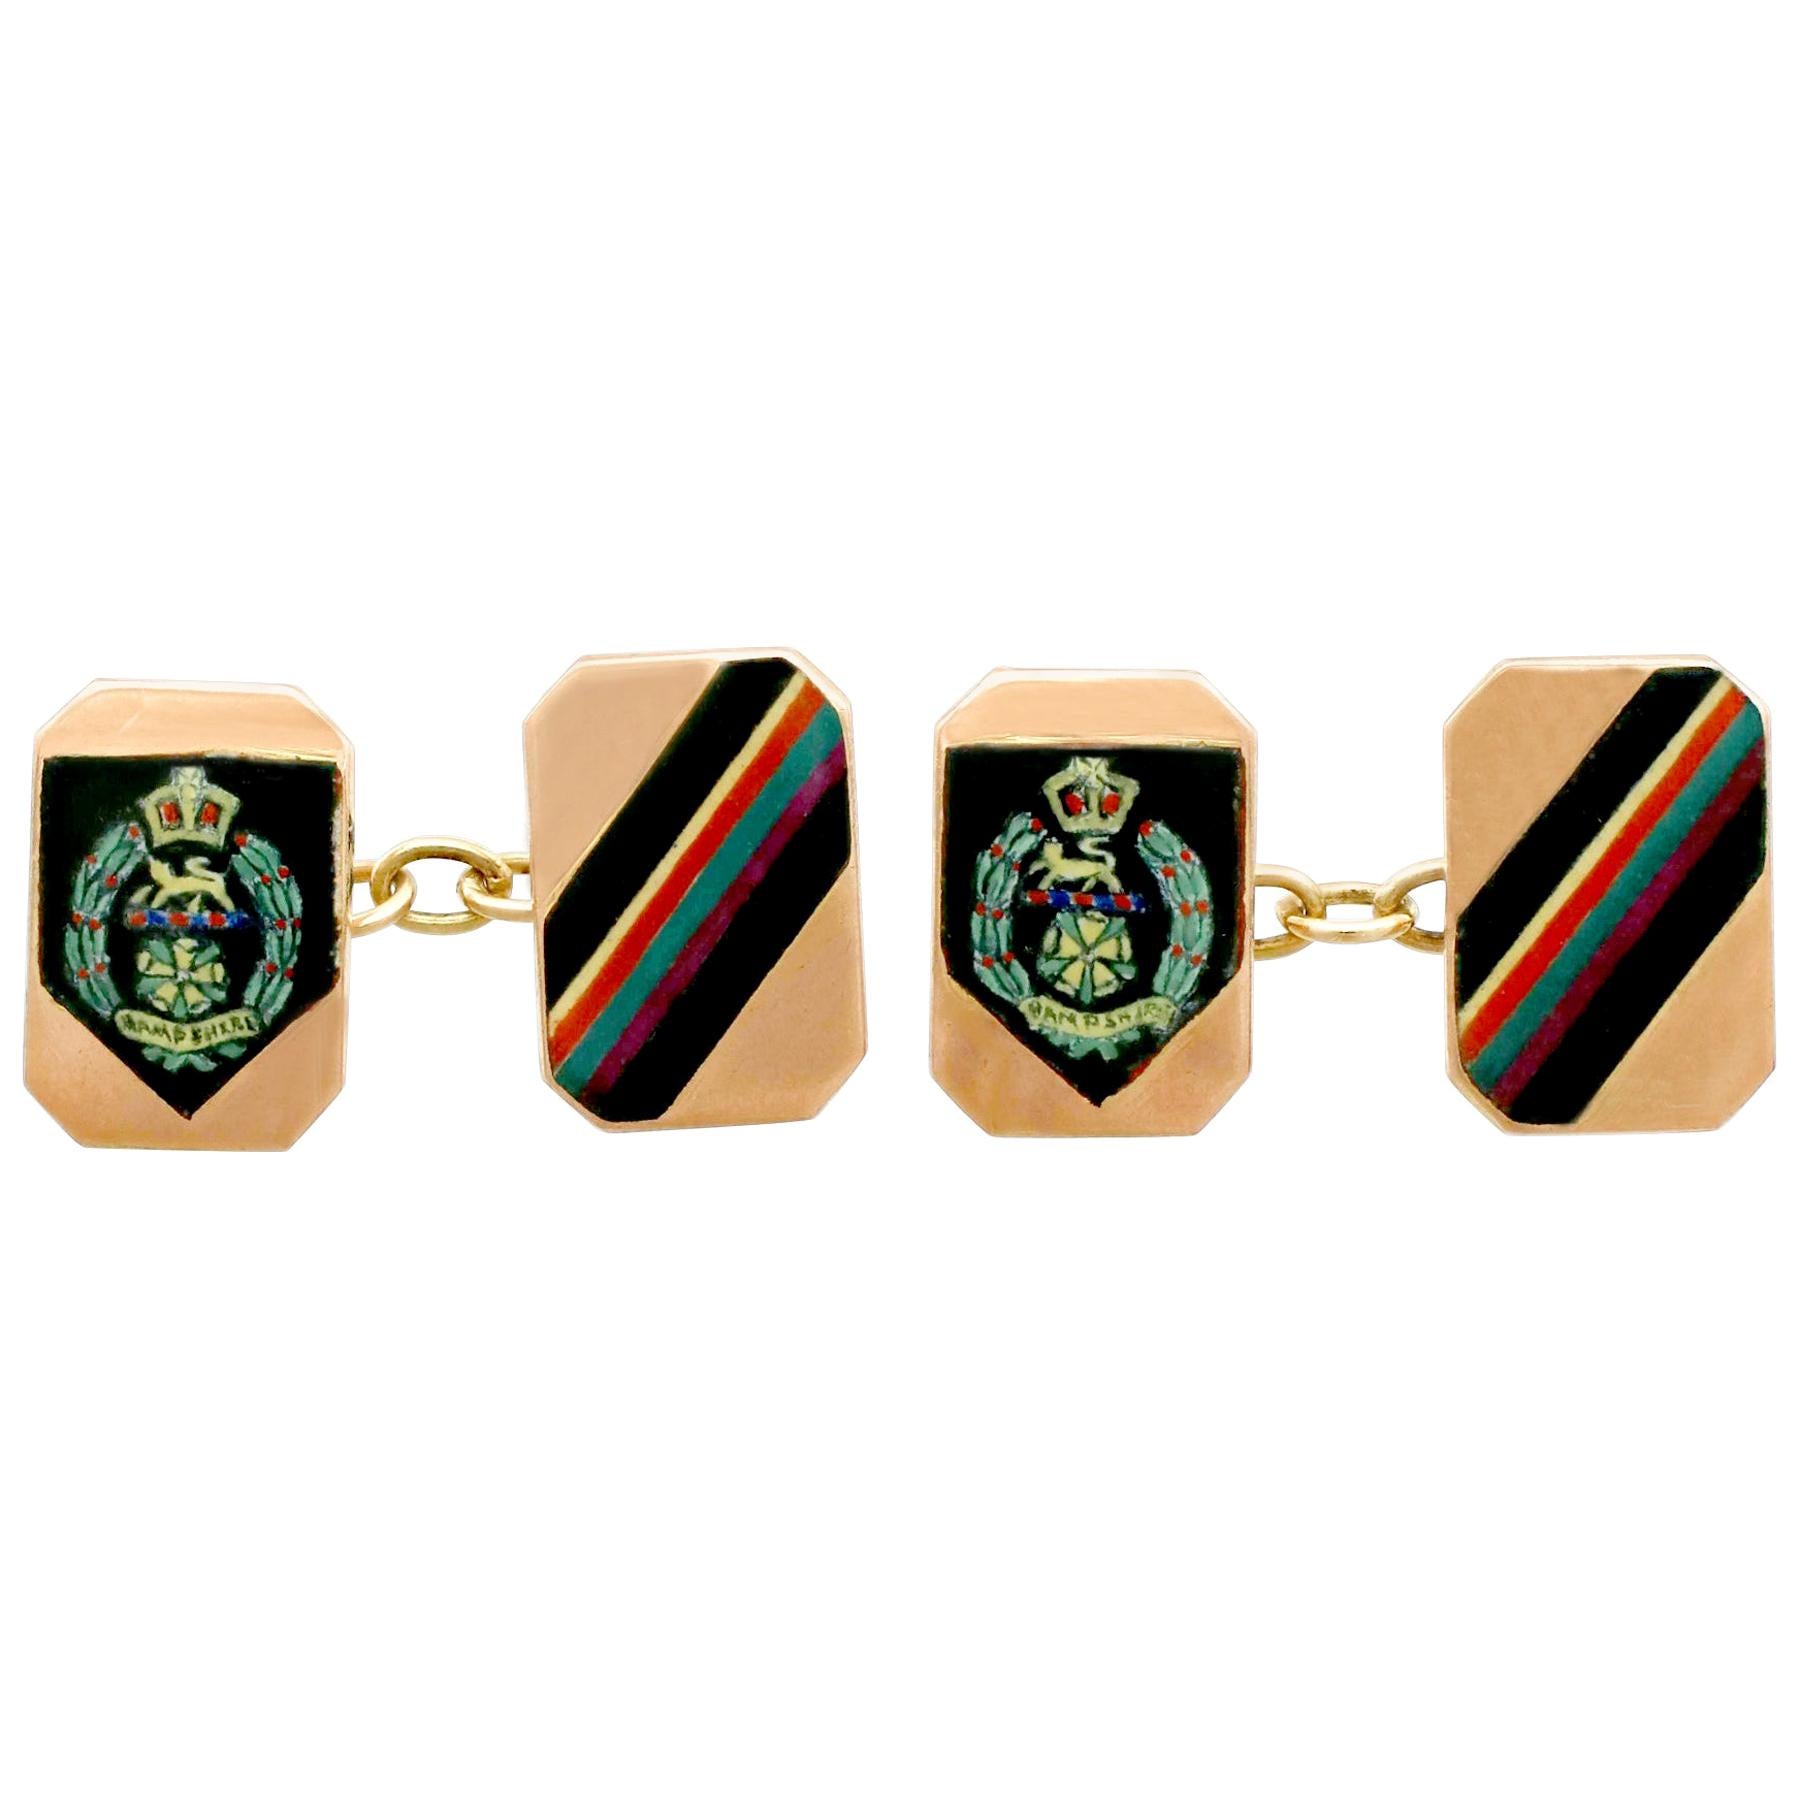 Vintage 1950s Military Interest Cufflinks in Rose Gold and Enamel